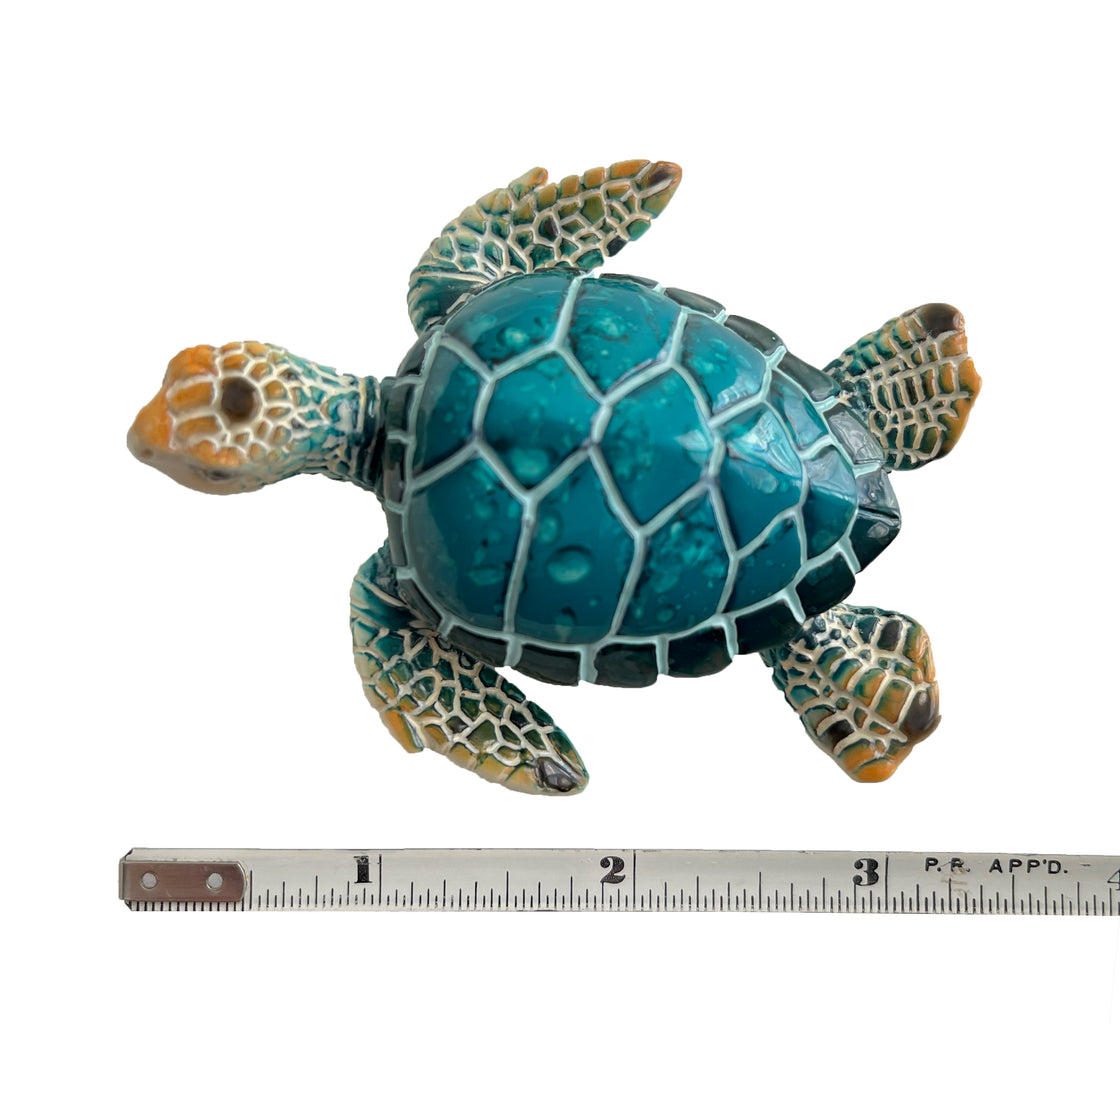 A top - view rengora turtle refrigerator magnet measures 3 inches in size